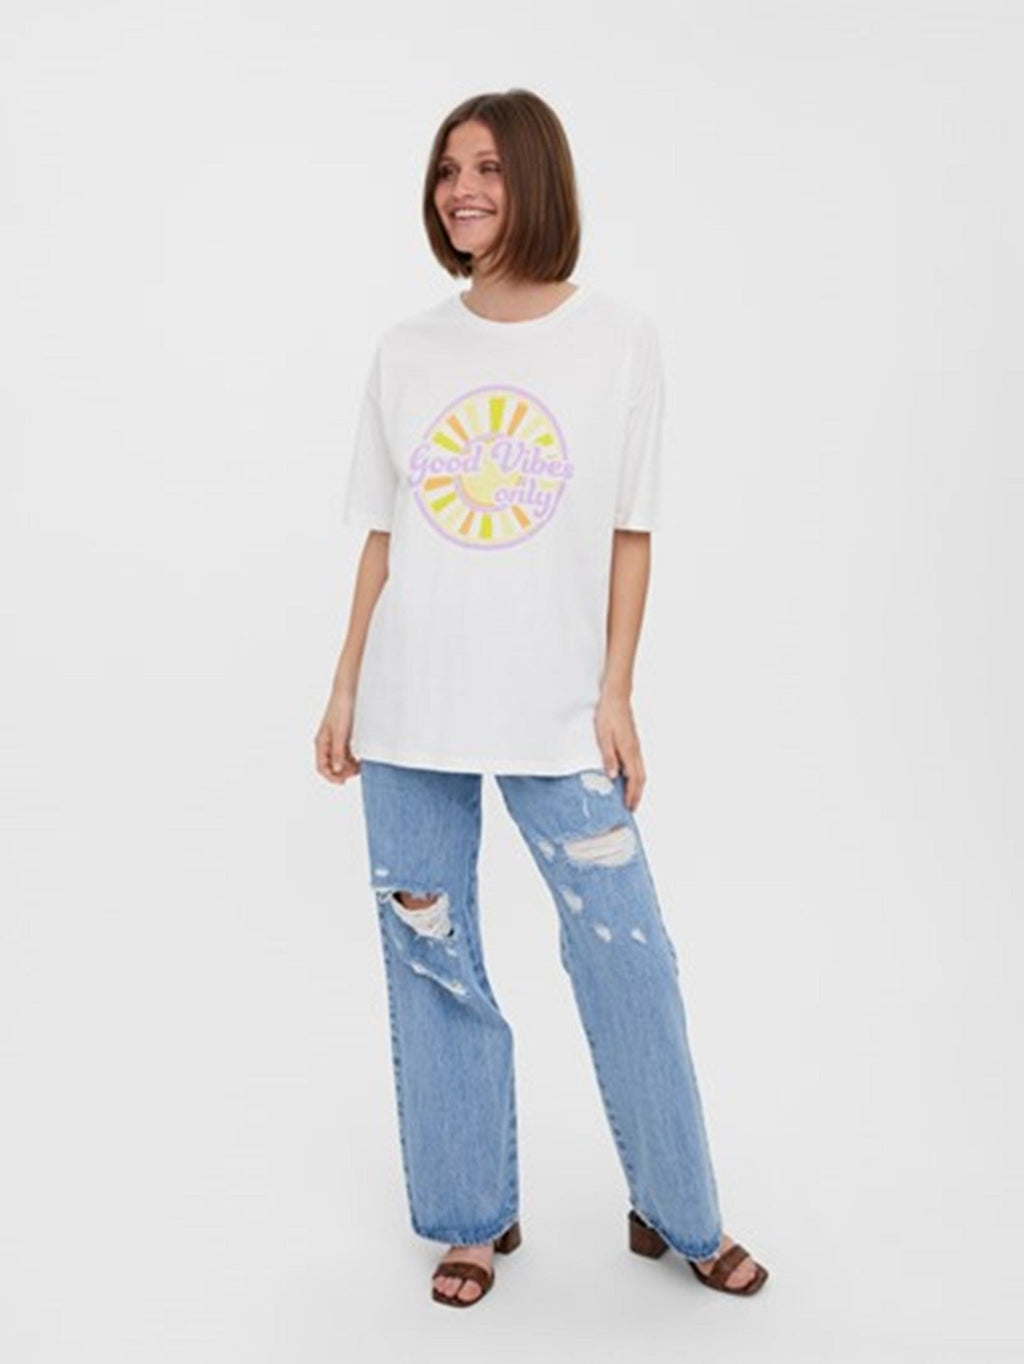 Fia Cody Long Top - White: Good Vibes Only